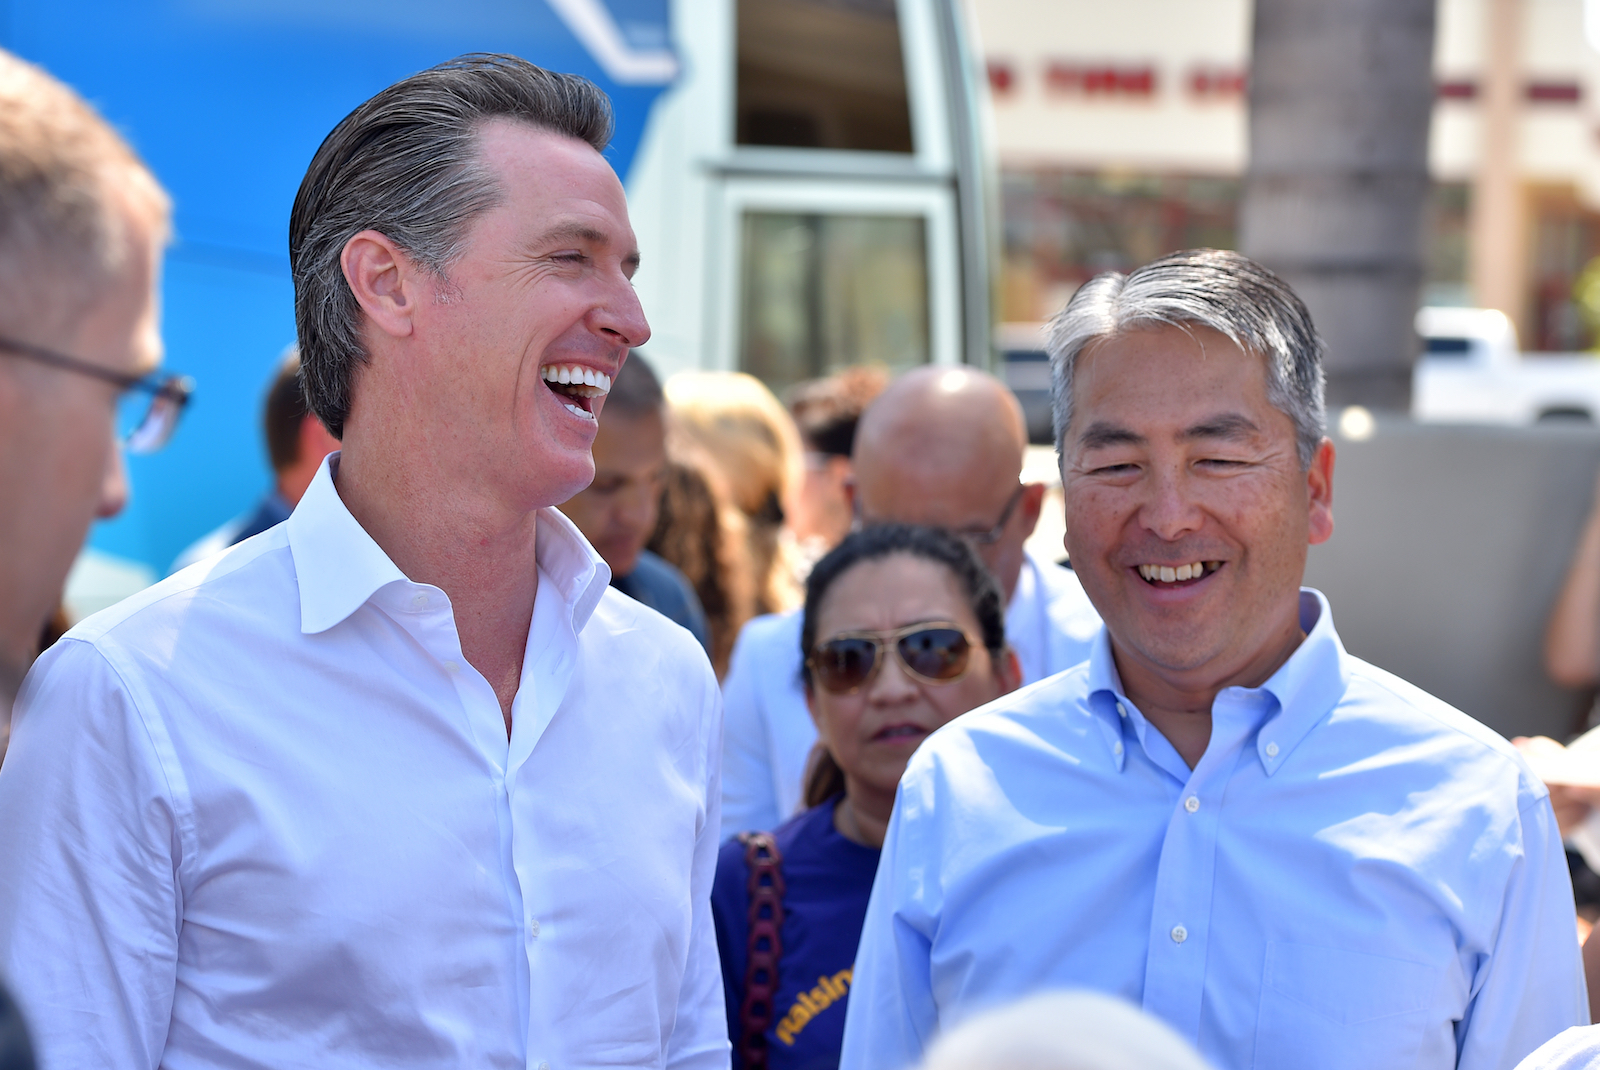 two men in button-up shirts smile in the middle of a sunny crowd